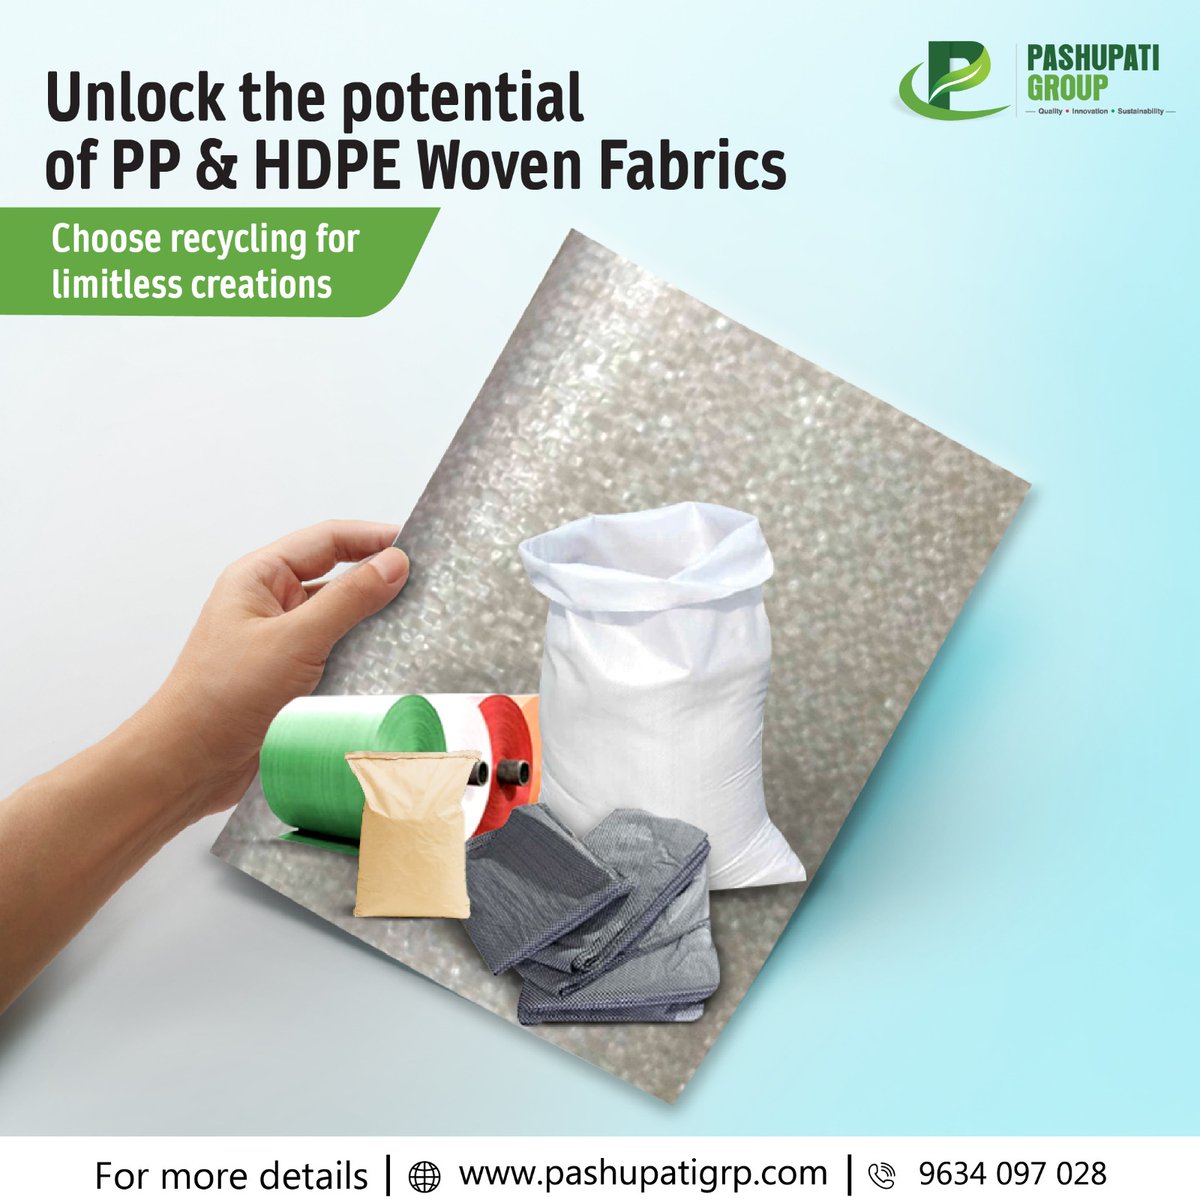 Unlocking innovation and sustainability with Pashupati. Revolutionize PP & HDPE Woven Fabrics. Choose recycling for a future of endless possibilities. Let's create earth-nurturing fertilizers together.

#recycling #HDPE #ppwovenfabric #pashupatigroup #Plasticwasterecycling